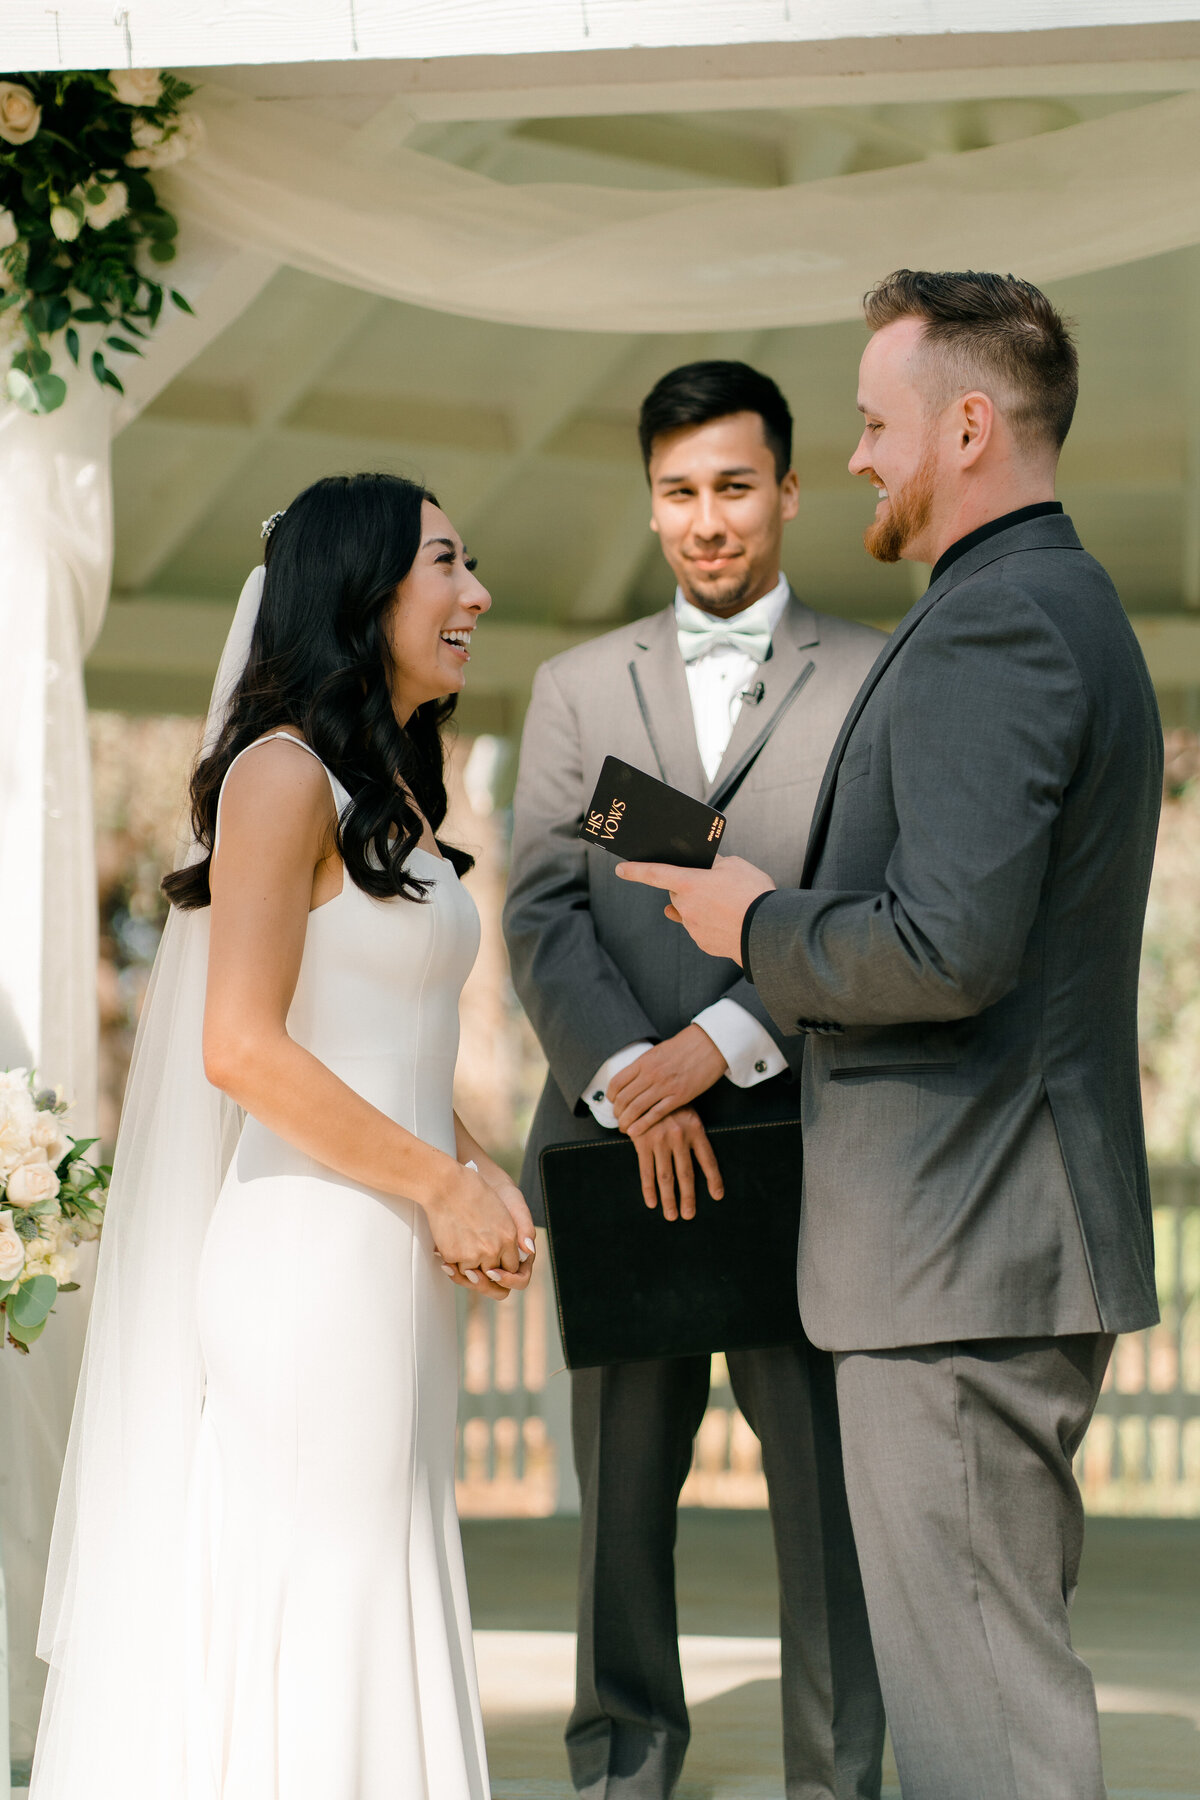 bride ad groom laughing at each other while officiant is smiling at the groom